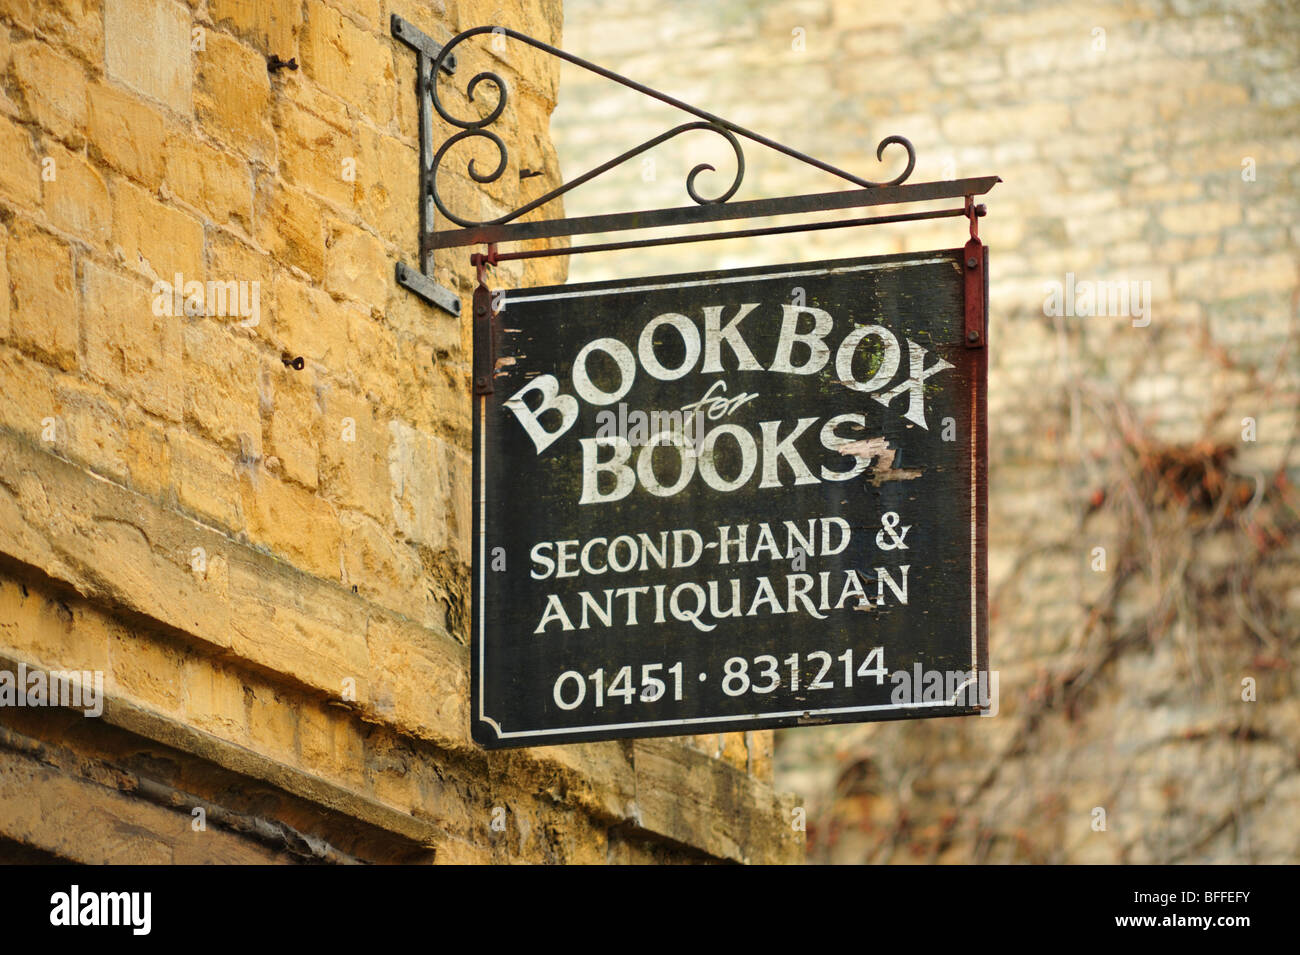 STOW-ON-THE-WOLD, GLOUCESTERSHIRE, UK - OCTOBER 31, 2009:  Book Shop Sign in the village Stock Photo